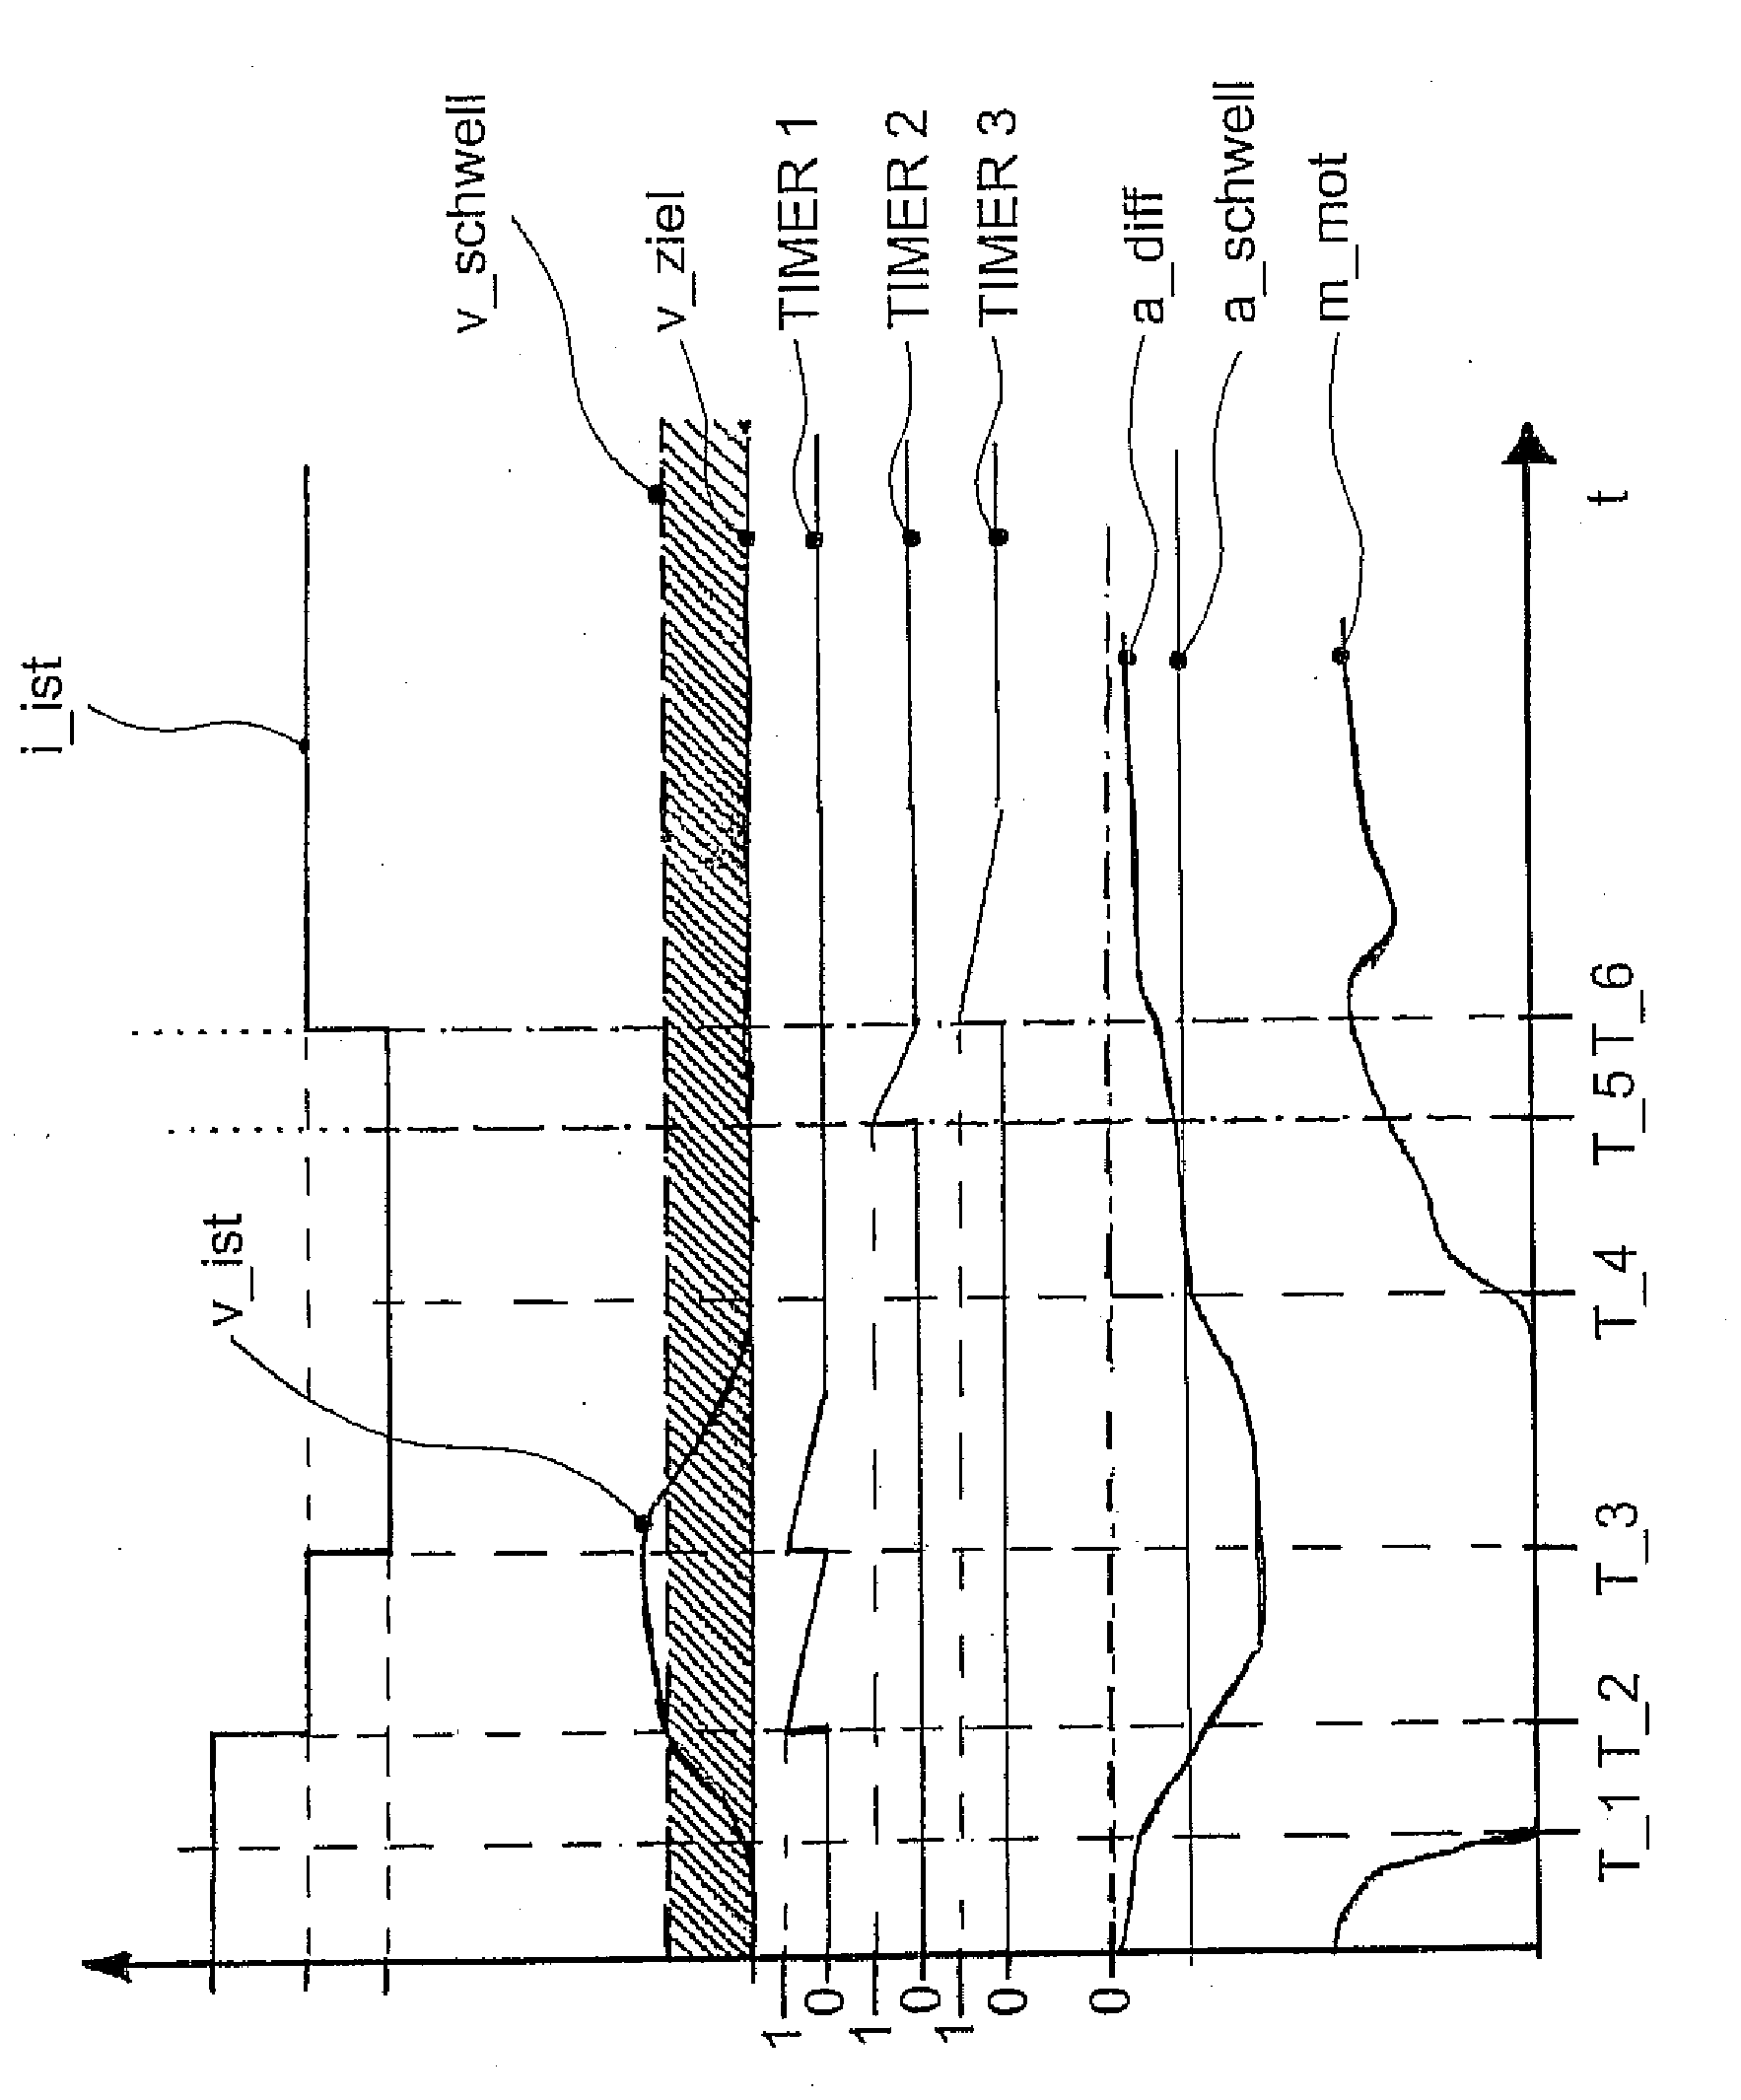 Method for Controlling a Drive Train of a Vehicle, with a Drive Motor and a Gearbox